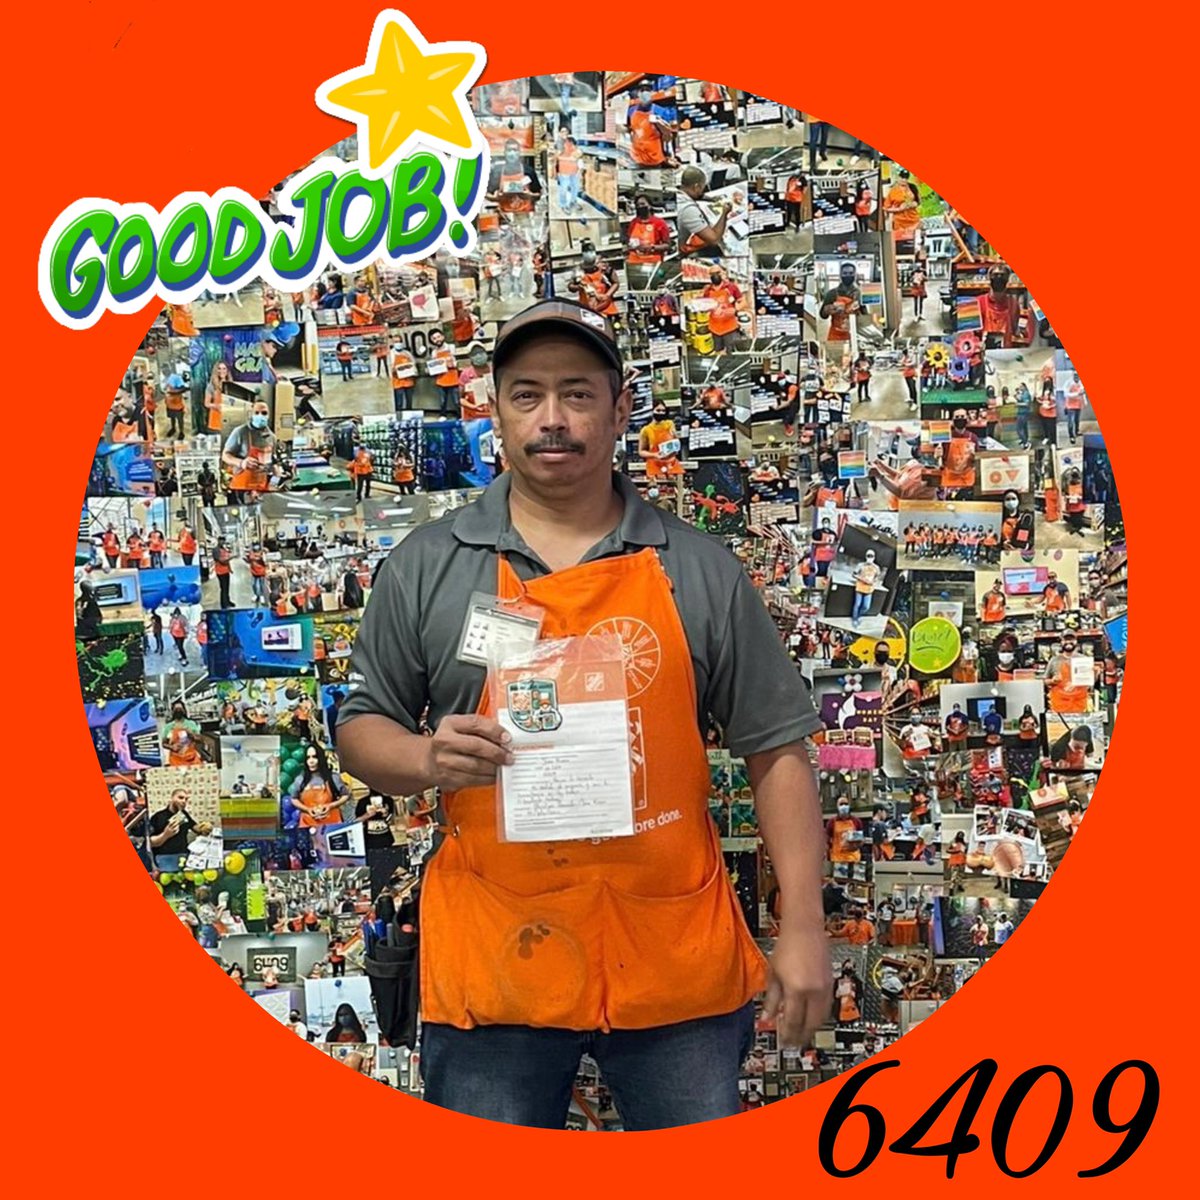 Las night we recognize our Nightcrew associate Juan Rivera for his commitment every night to exceed and go beyond our expectations. Keep it up Juan!! Great job!!👍🏽✨ #thd6409 @RosaSally @SepulvedaEvelix @MoriRosemarie @YamilORivera1 @SASM6409Yahaira @JuanRiv33006222